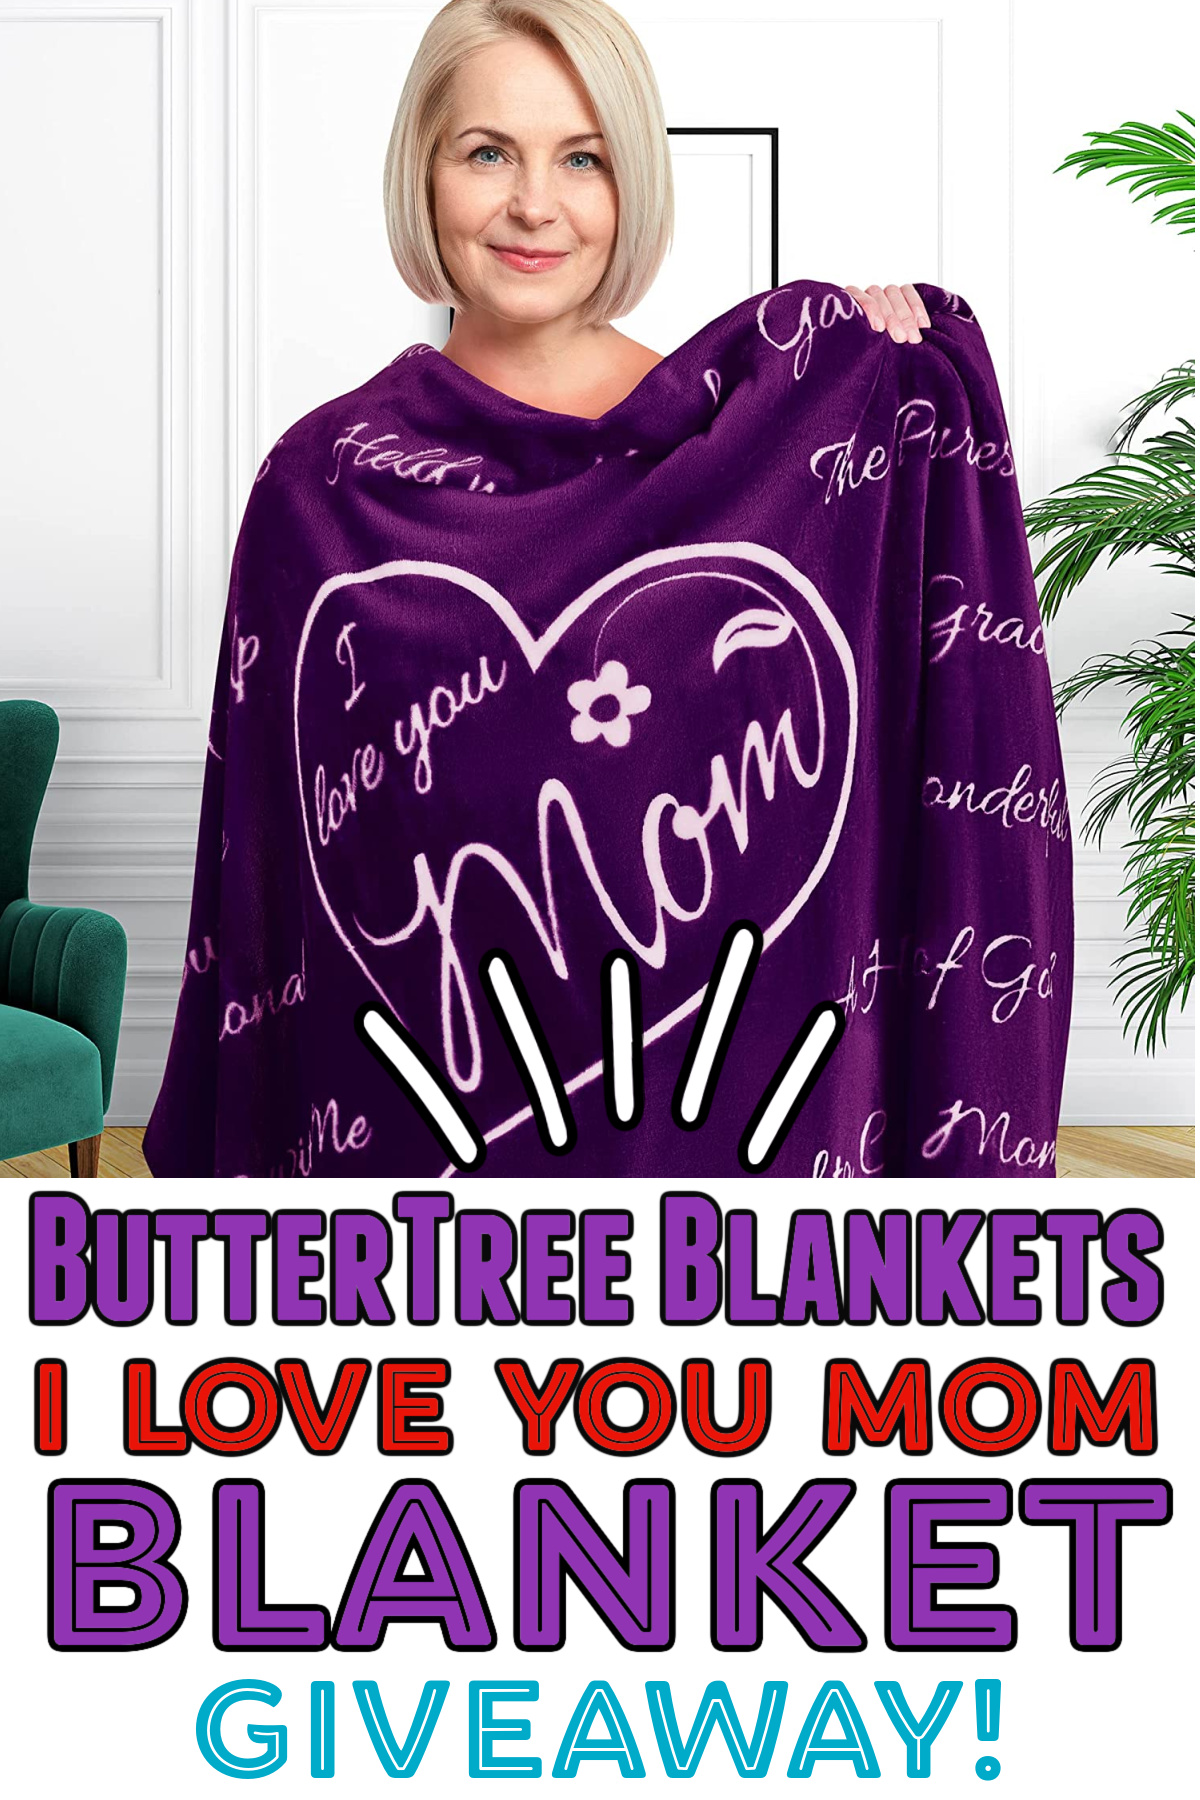 ButterTree Blankets - Best Blanket For Mom Giveaway!